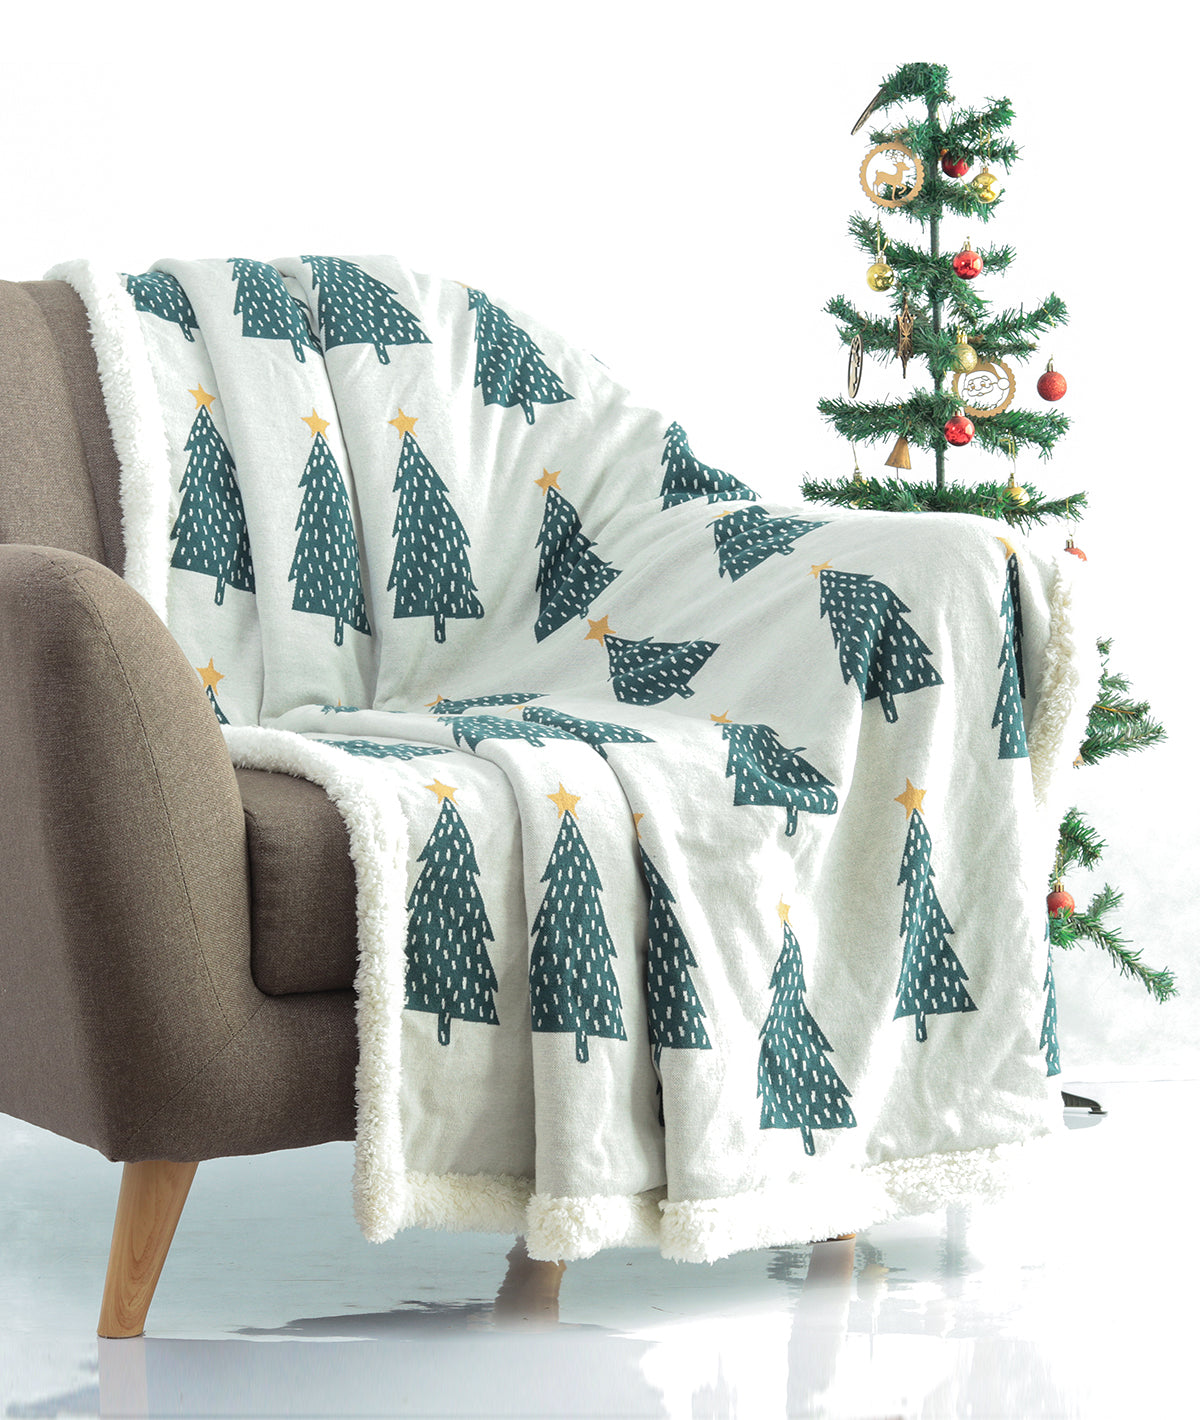 Christmas Tree Cotton Knitted Kids Blanket with Warm Sherpa Fabric (Ivory, Green & Yellow)